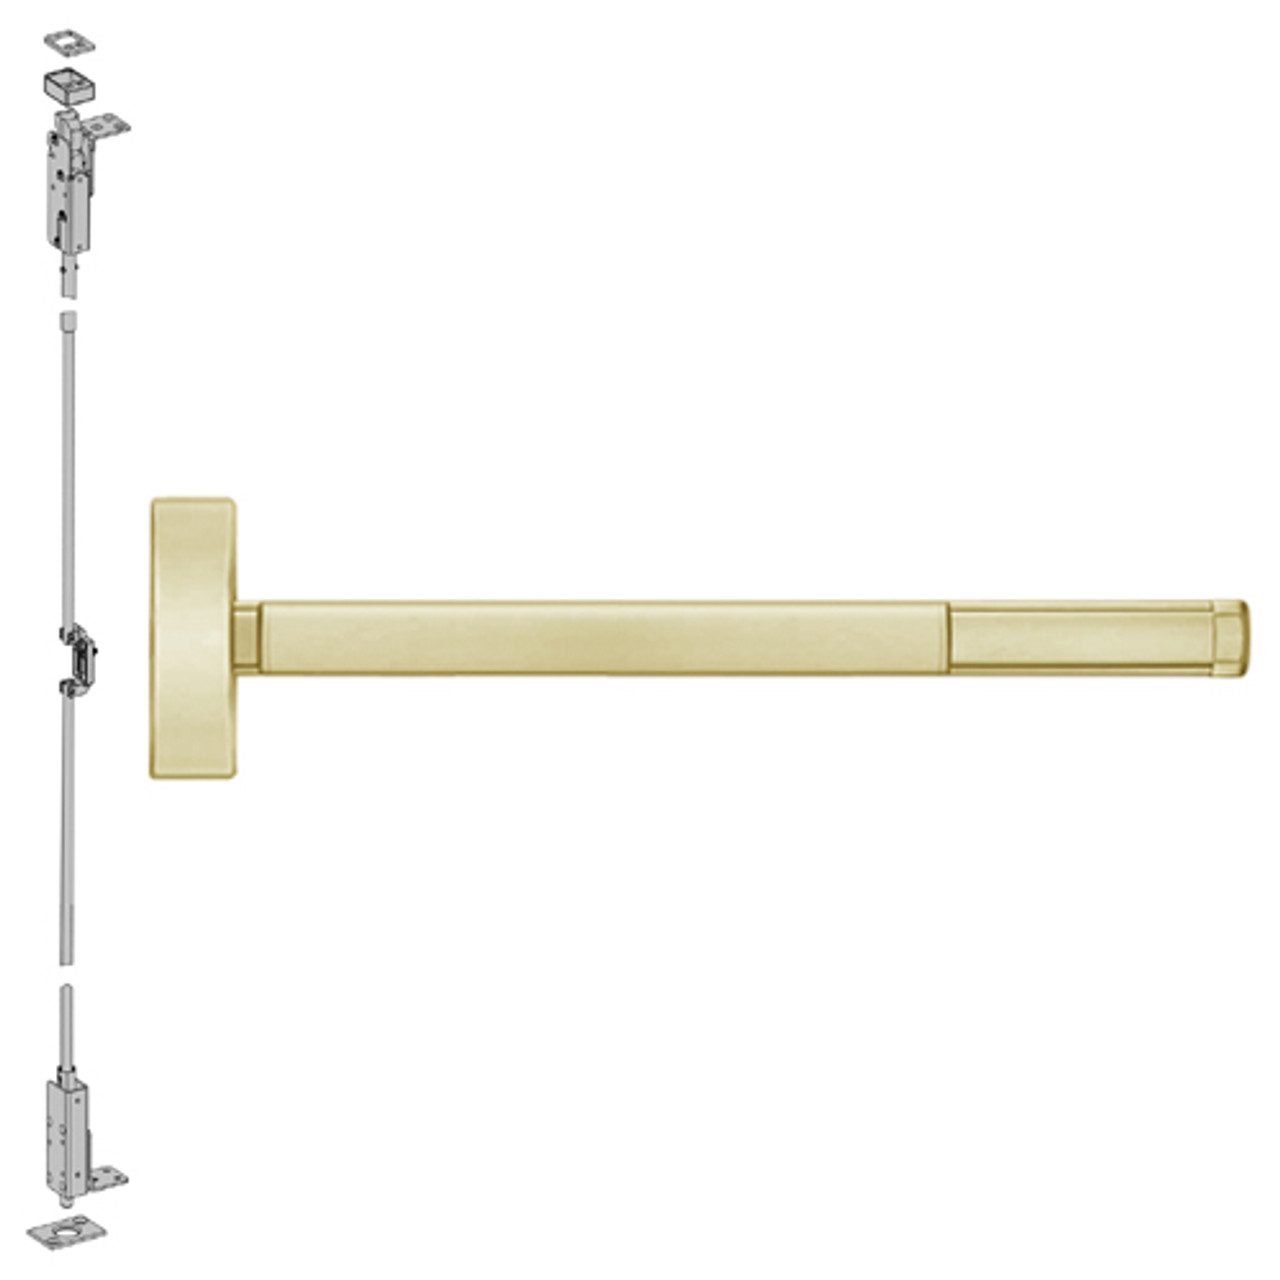 DEFL2703LBR-606-48 PHI 2700 Series Fire Rated Wood Door Concealed Vertical Exit Device with Delayed Egress Prepped for Key Retracts Latchbolt in Satin Brass Finish